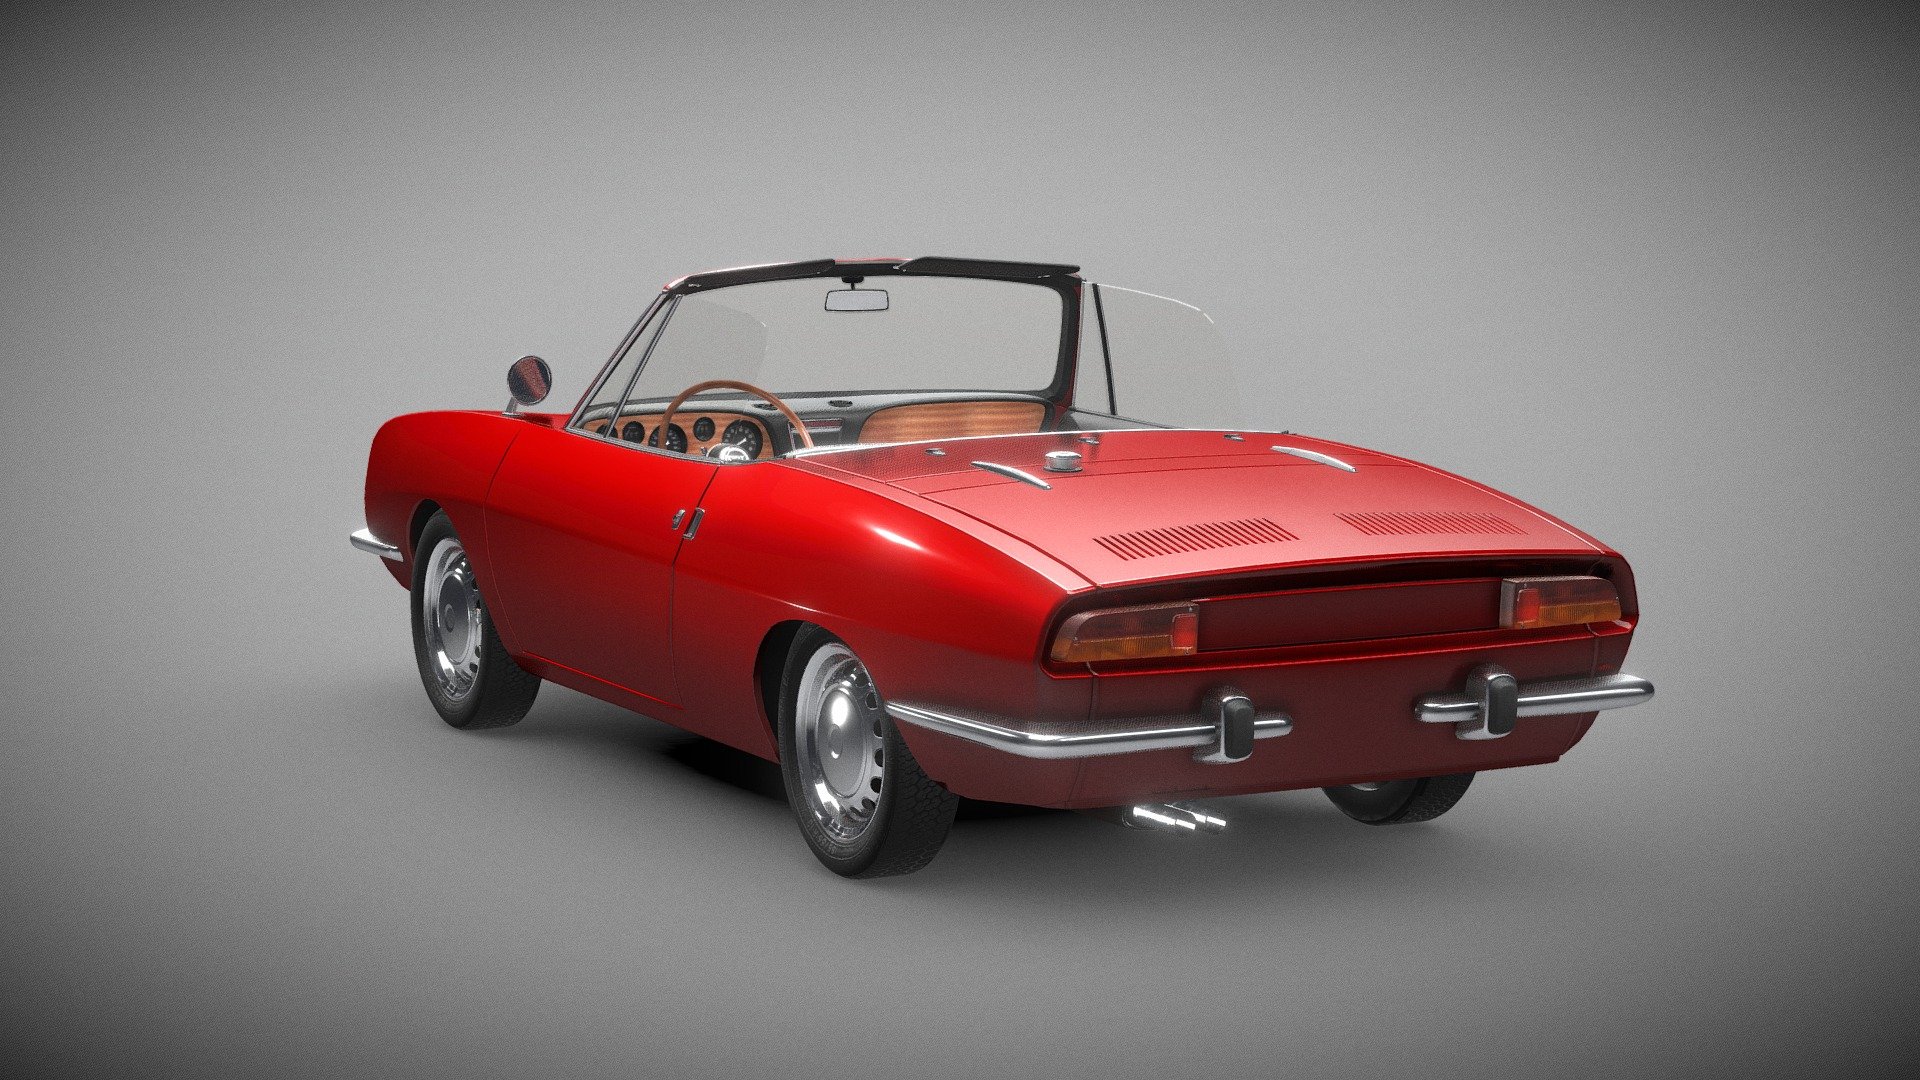 At the same time as the Coupé, Fiat also introduced the convertible sporty two-seater Spider, with the original 843 cc engine tuned to produce 49 hp (37 kW) which allowed it to reach a top speed of 145 km/h (90 mph). The body was designed and built by Bertone.

Modeled in Blender - Fiat 850 Spider - Download Free 3D model by Lucas Soler (@lucassoler) 3d model